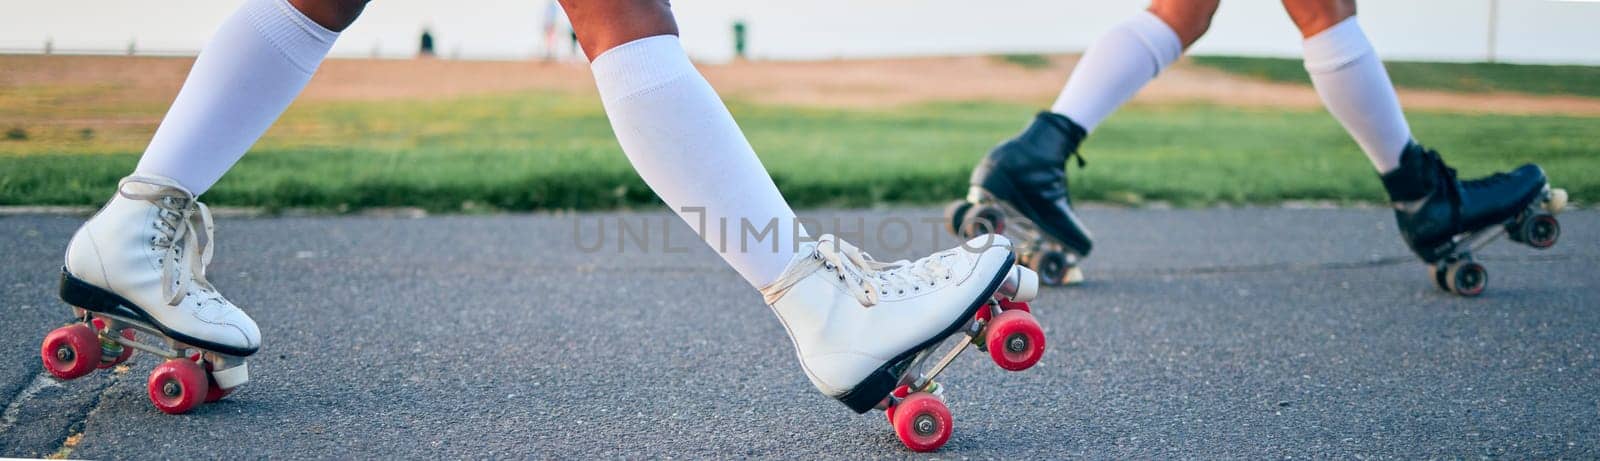 Legs, roller skates and shoes of friends on street for exercise, workout or training outdoor. Skating, feet of people and sports on road to travel, journey and moving for freedom, hobby and fitness by YuriArcurs